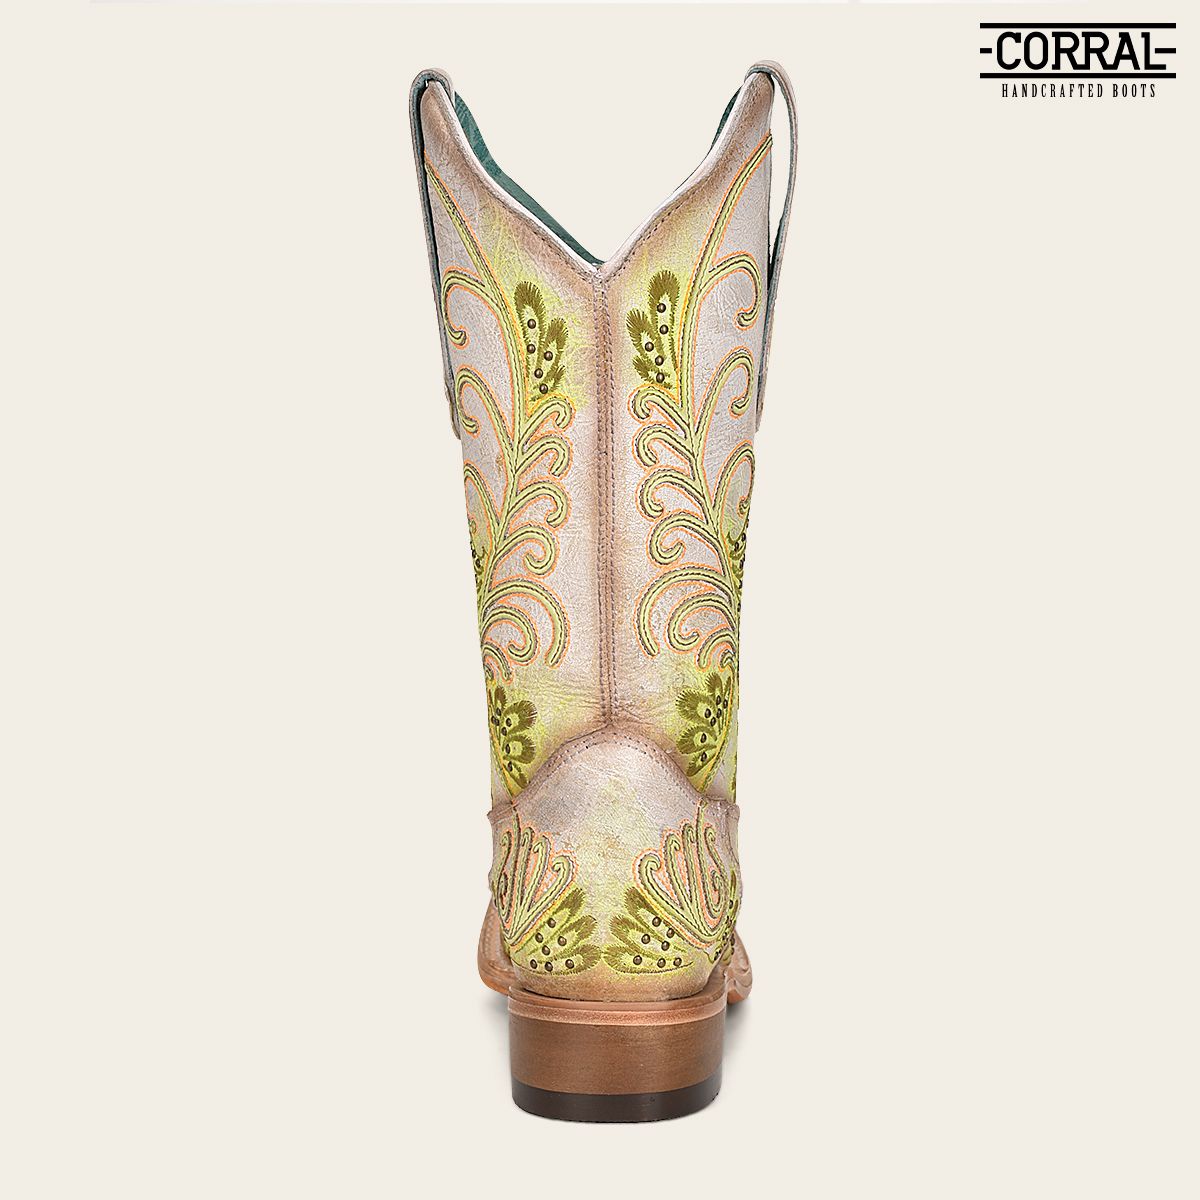 C3967 - M Corral green western cowgirl leather studded boots for women